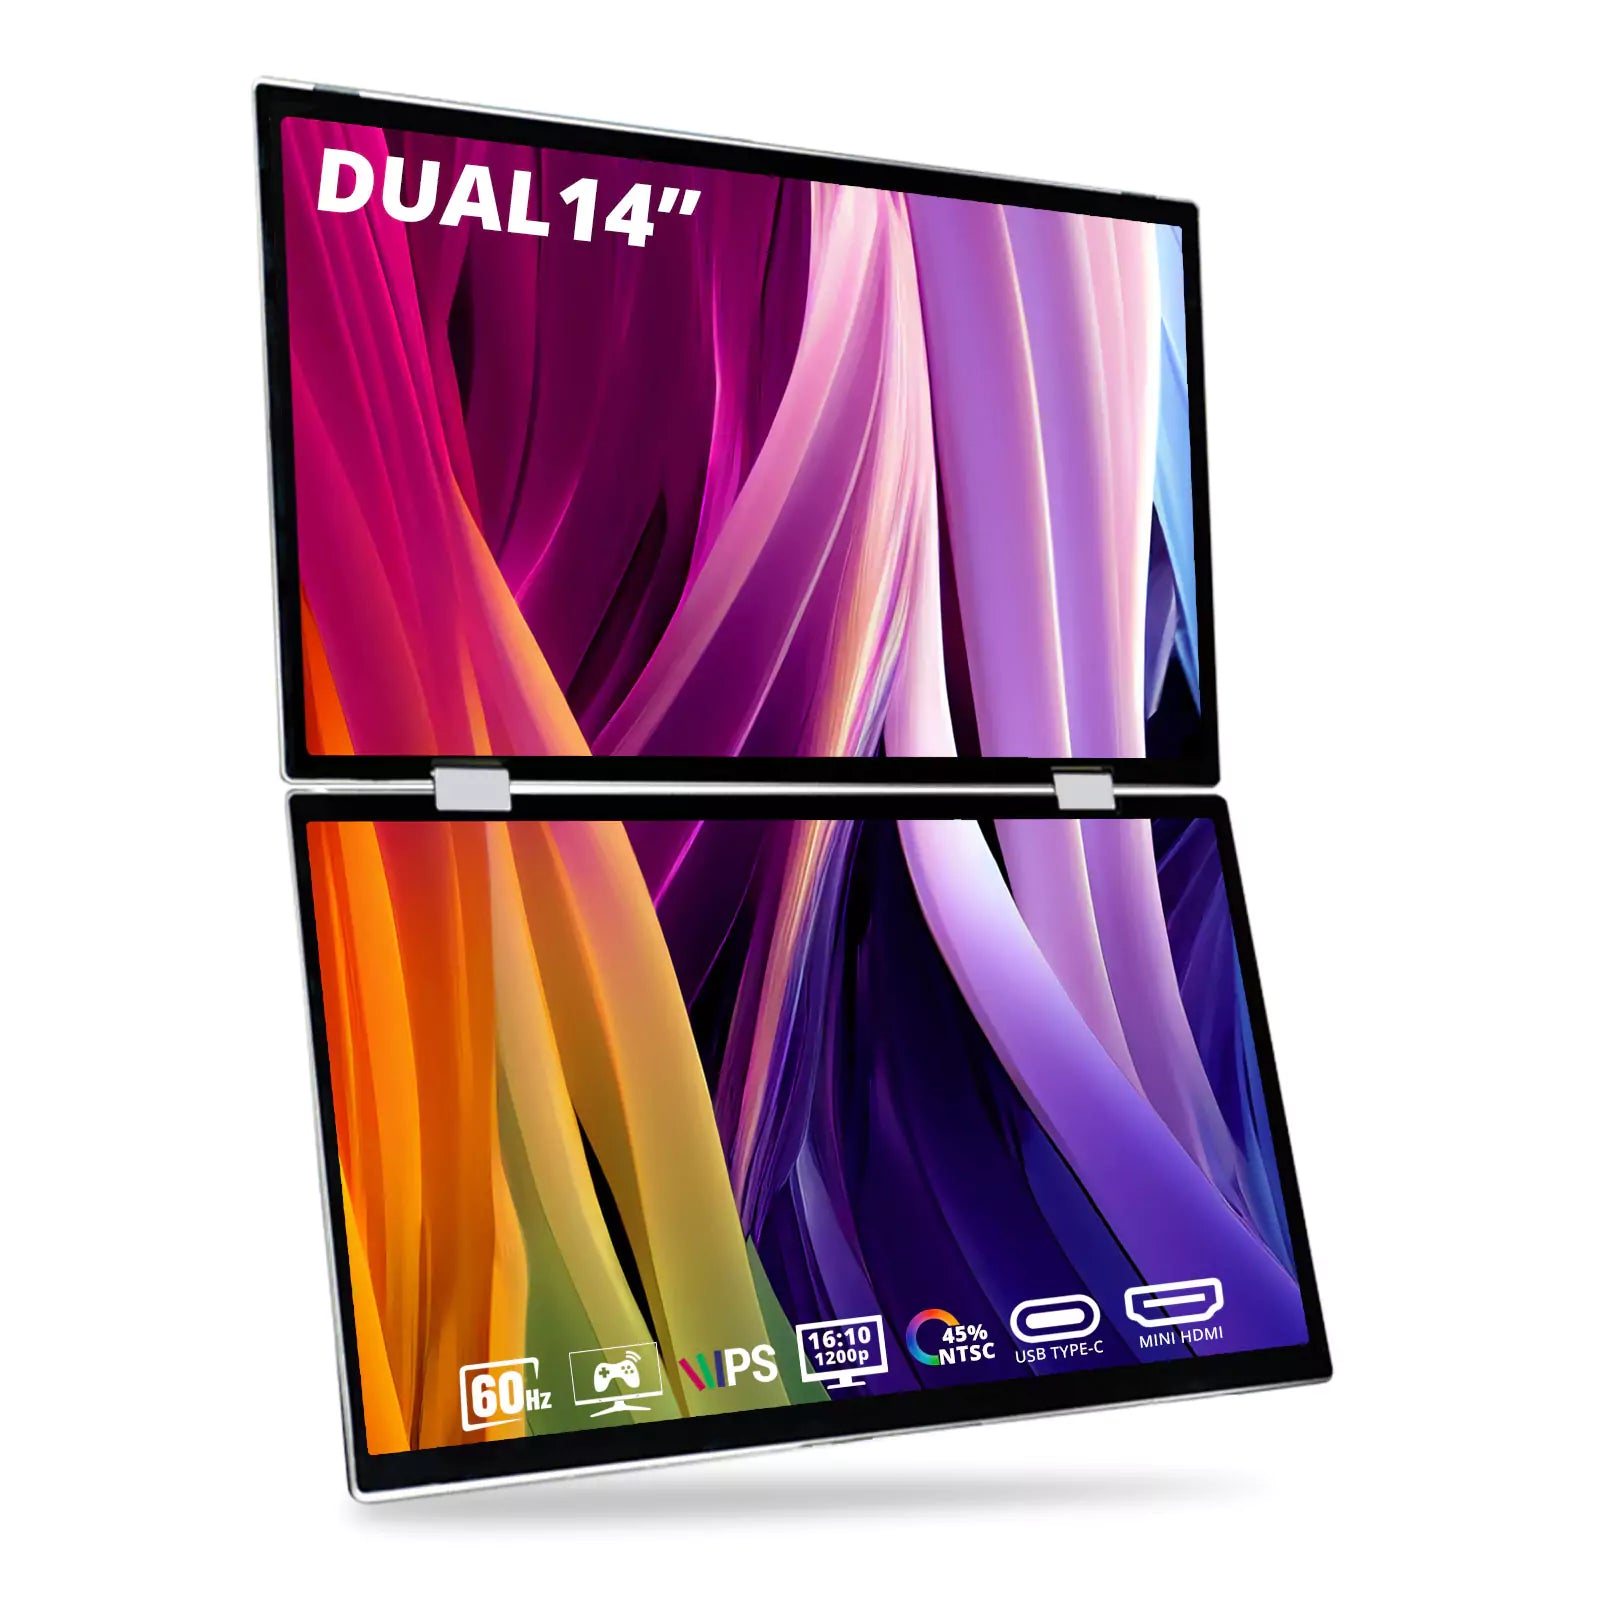 D14s Portable Dual View Monitor 14"